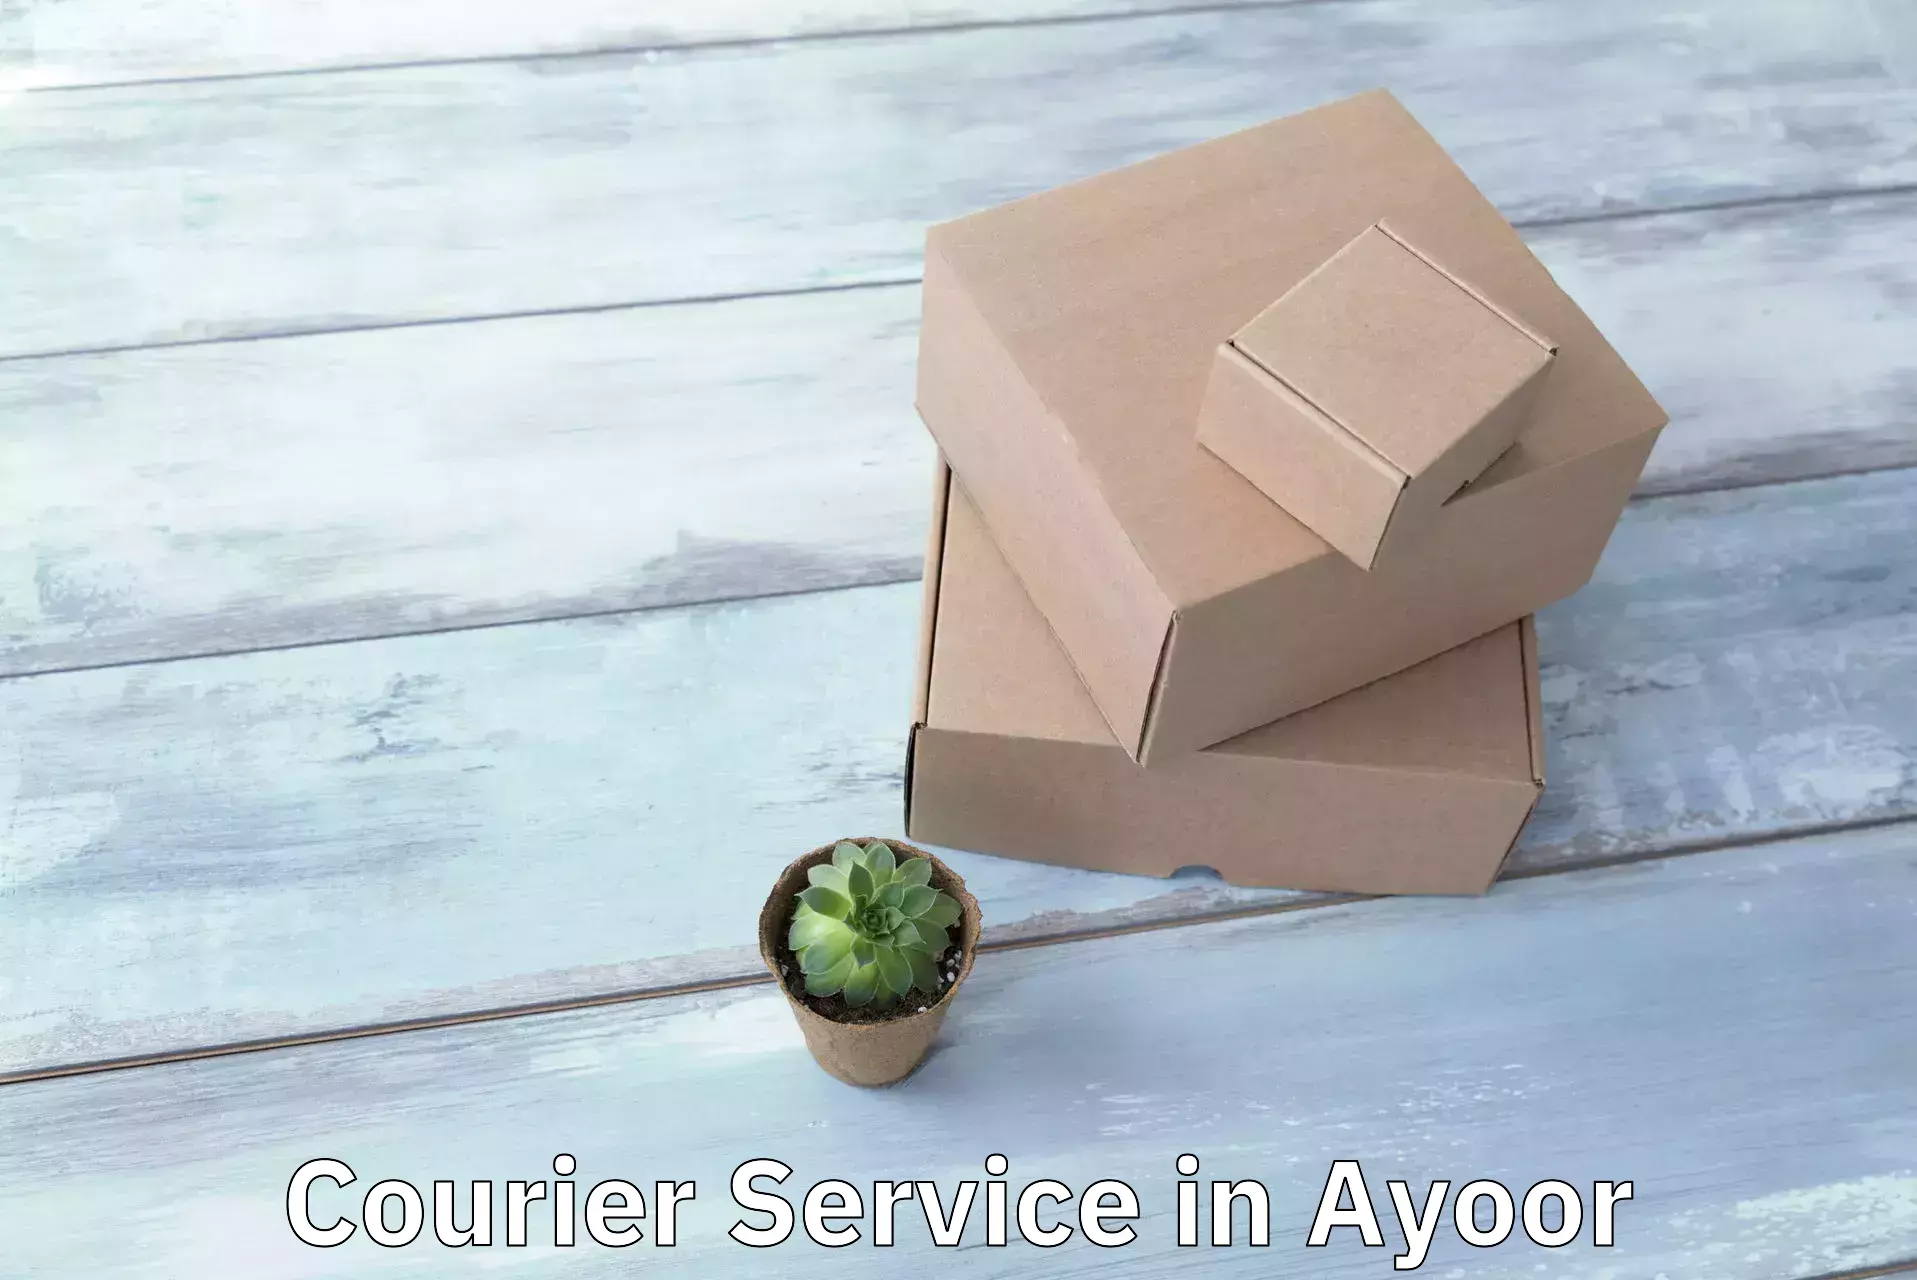 End-to-end delivery in Ayoor